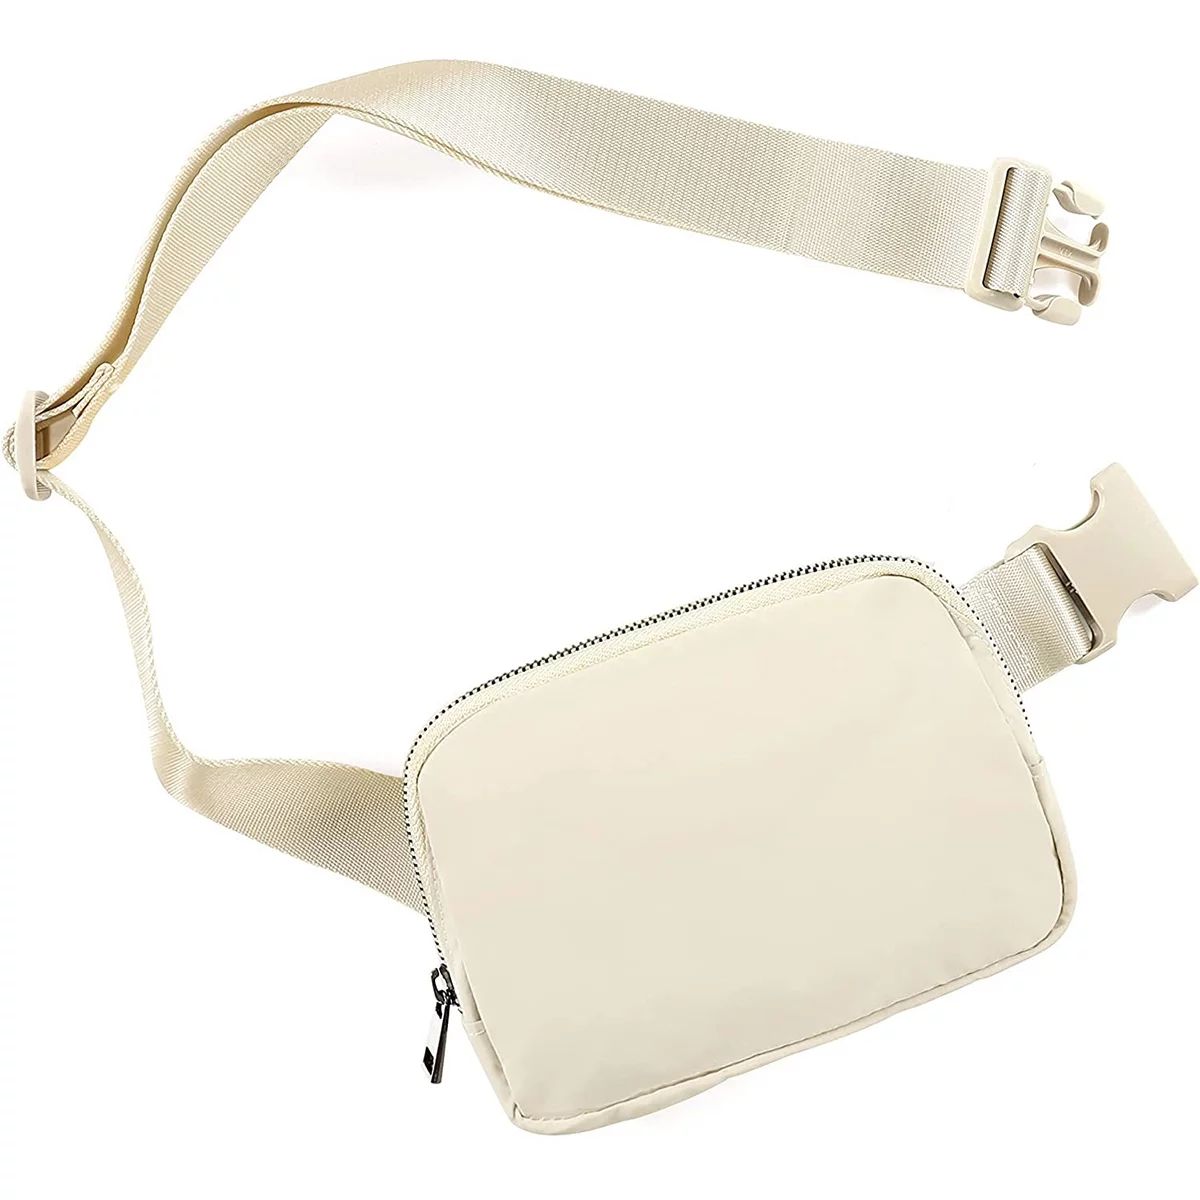 Fanny Pack for Women & Men Small Belt Bag Fashion Waist Pack with Adjustable Strap ivory | Walmart (US)